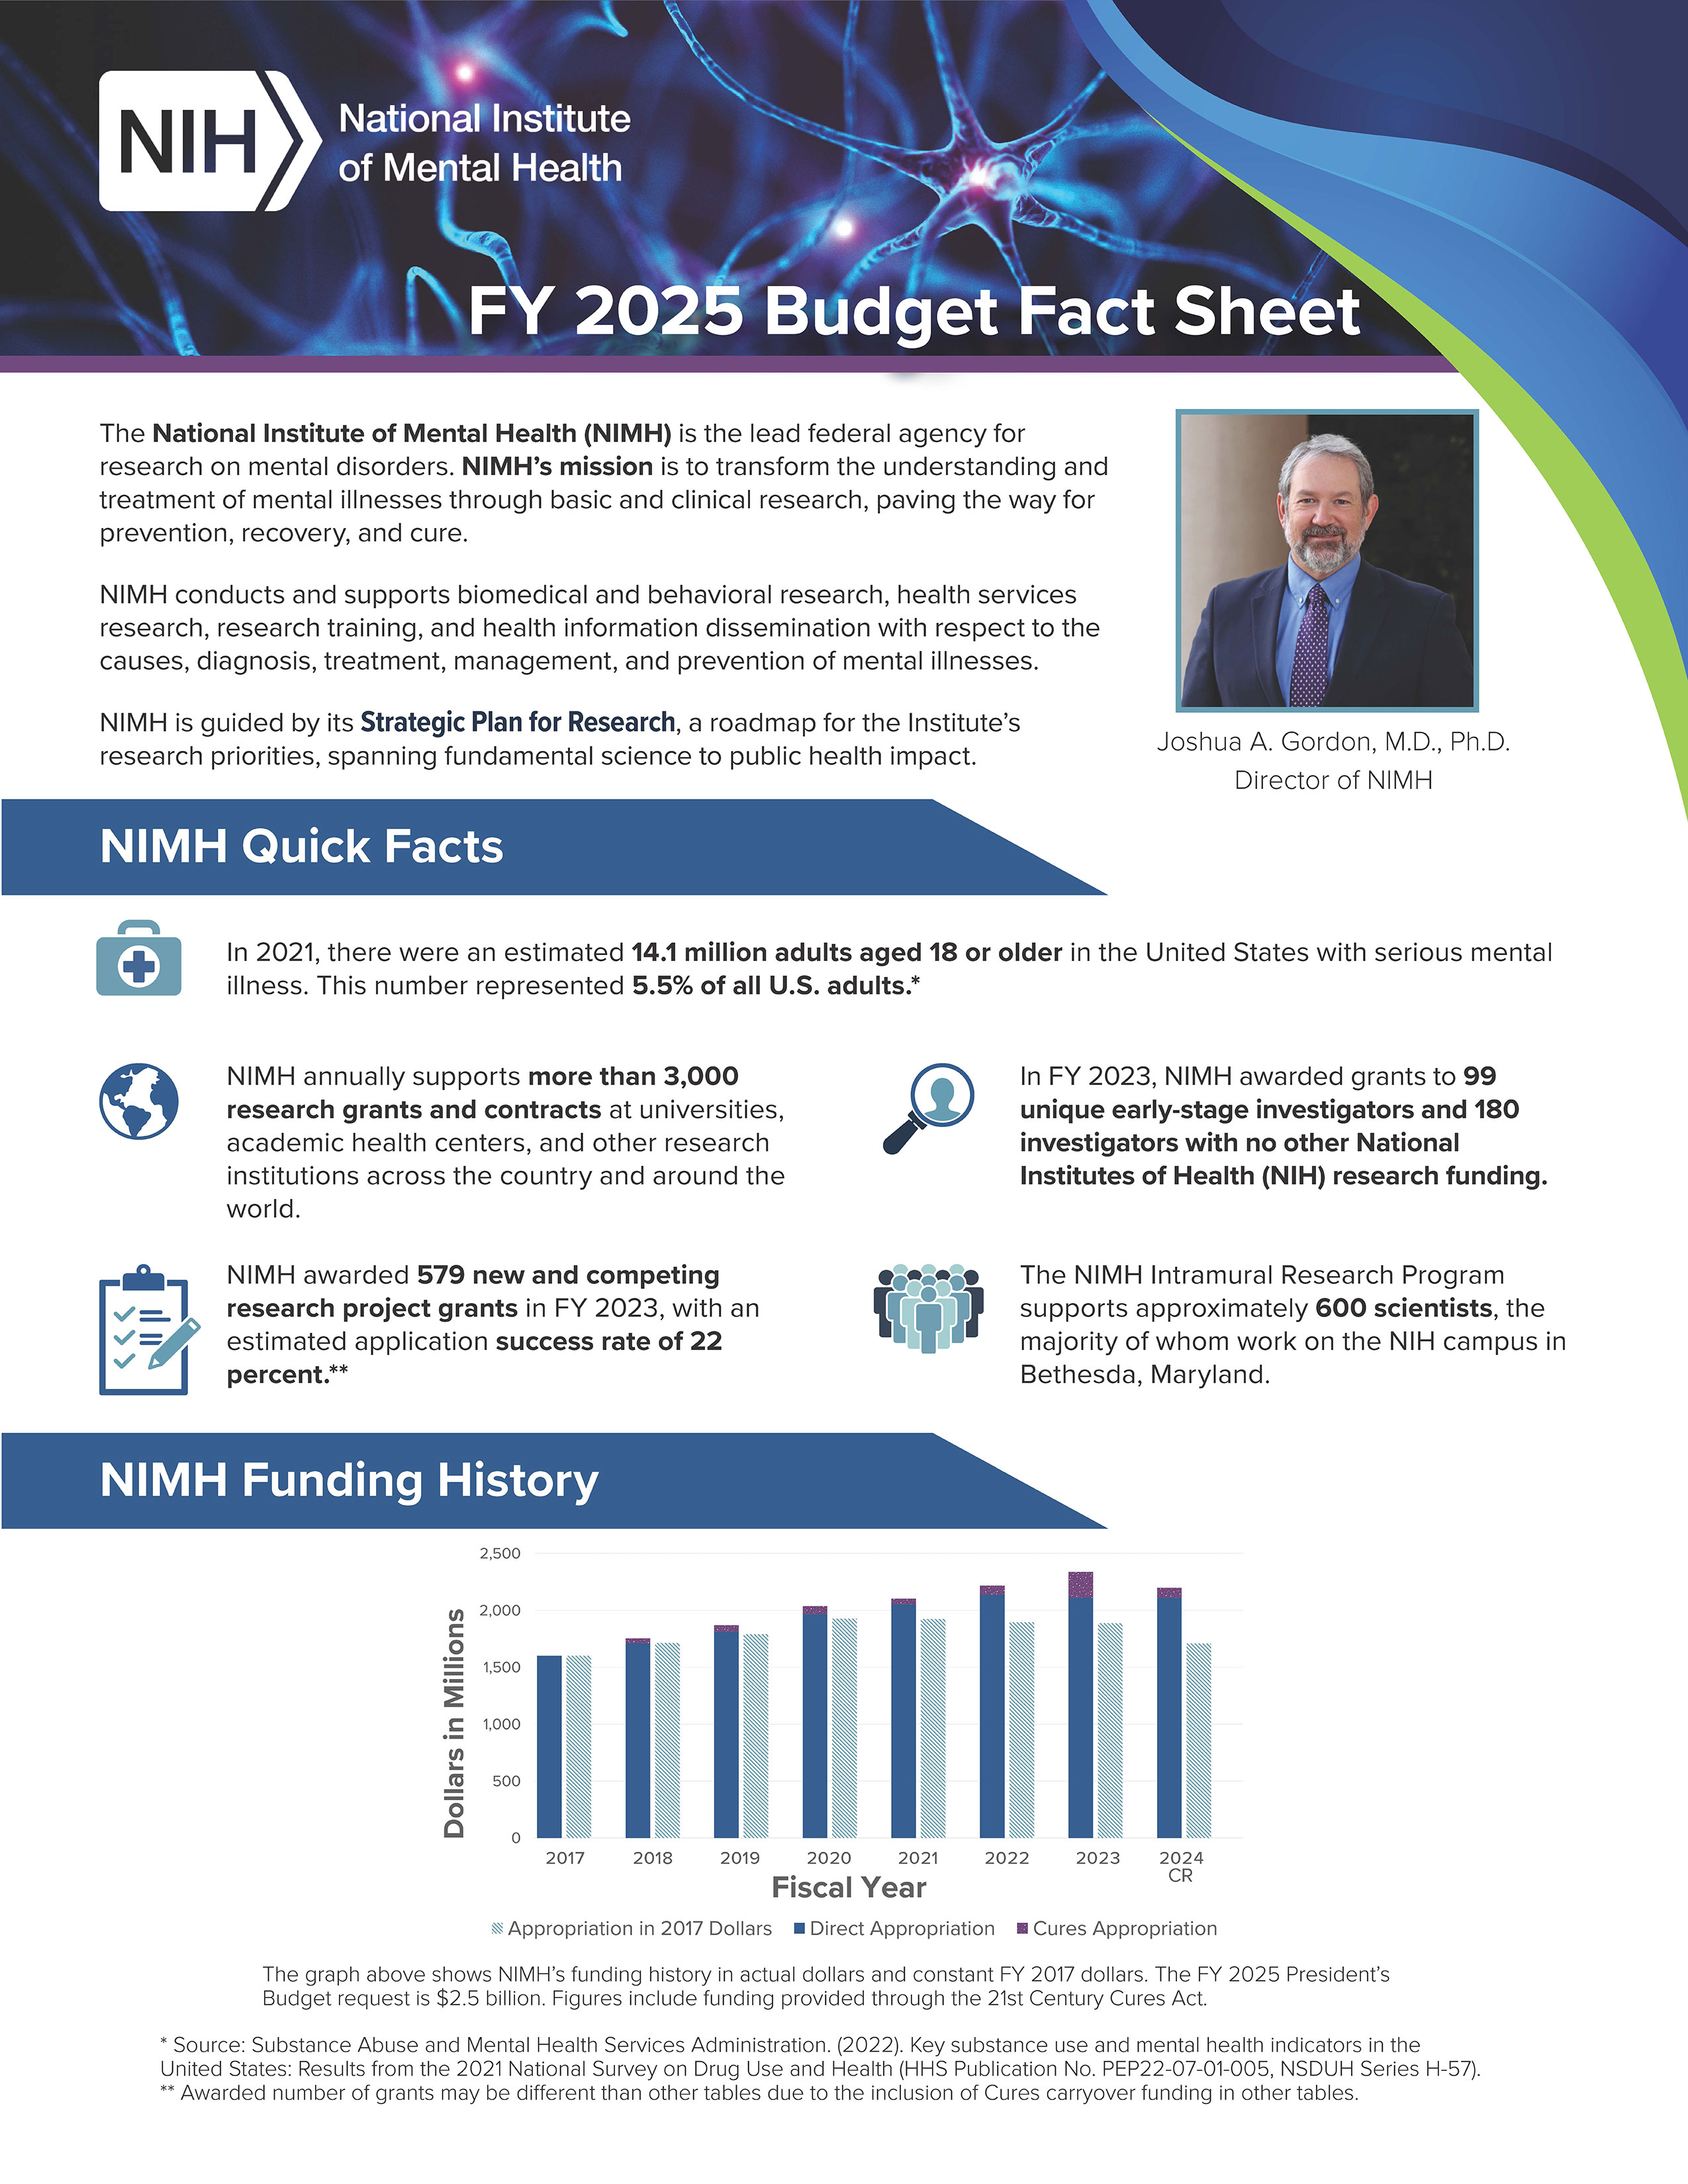 NIMH FY 2025 Budget Fact sheet containing NIMH quick facts and funding history.